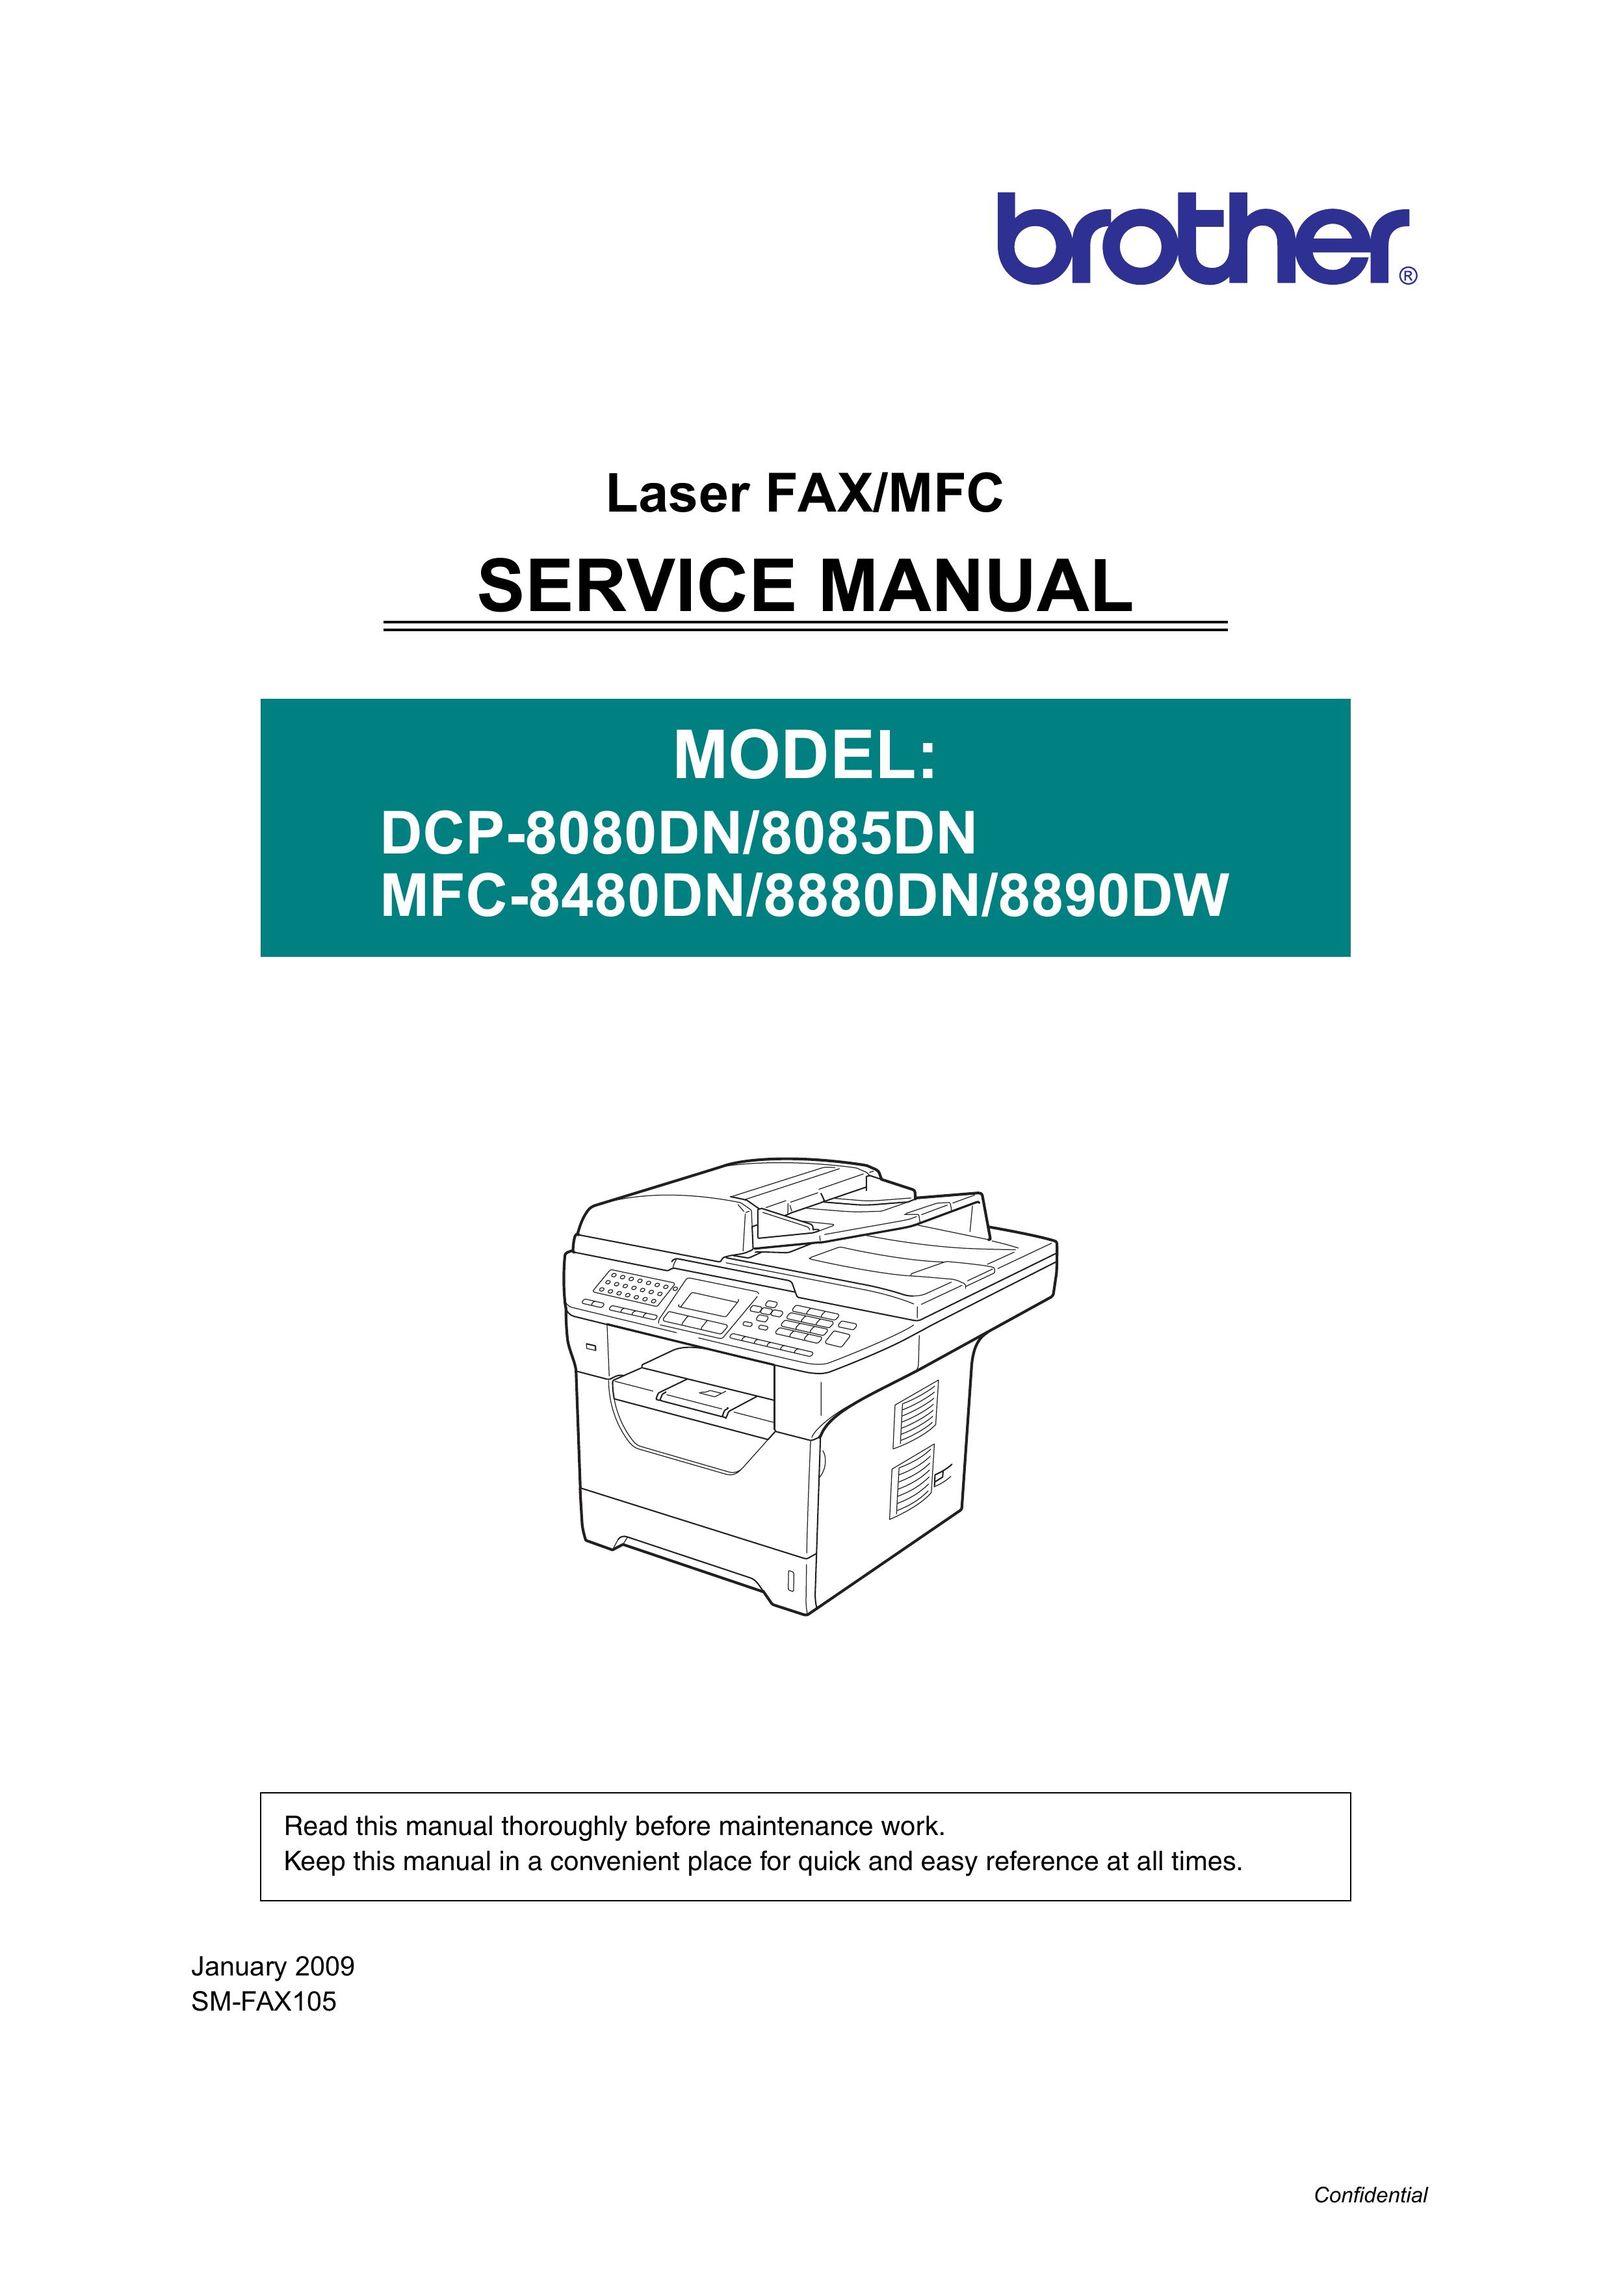 Brother DCP-8080DN/8085DN Fax Machine User Manual